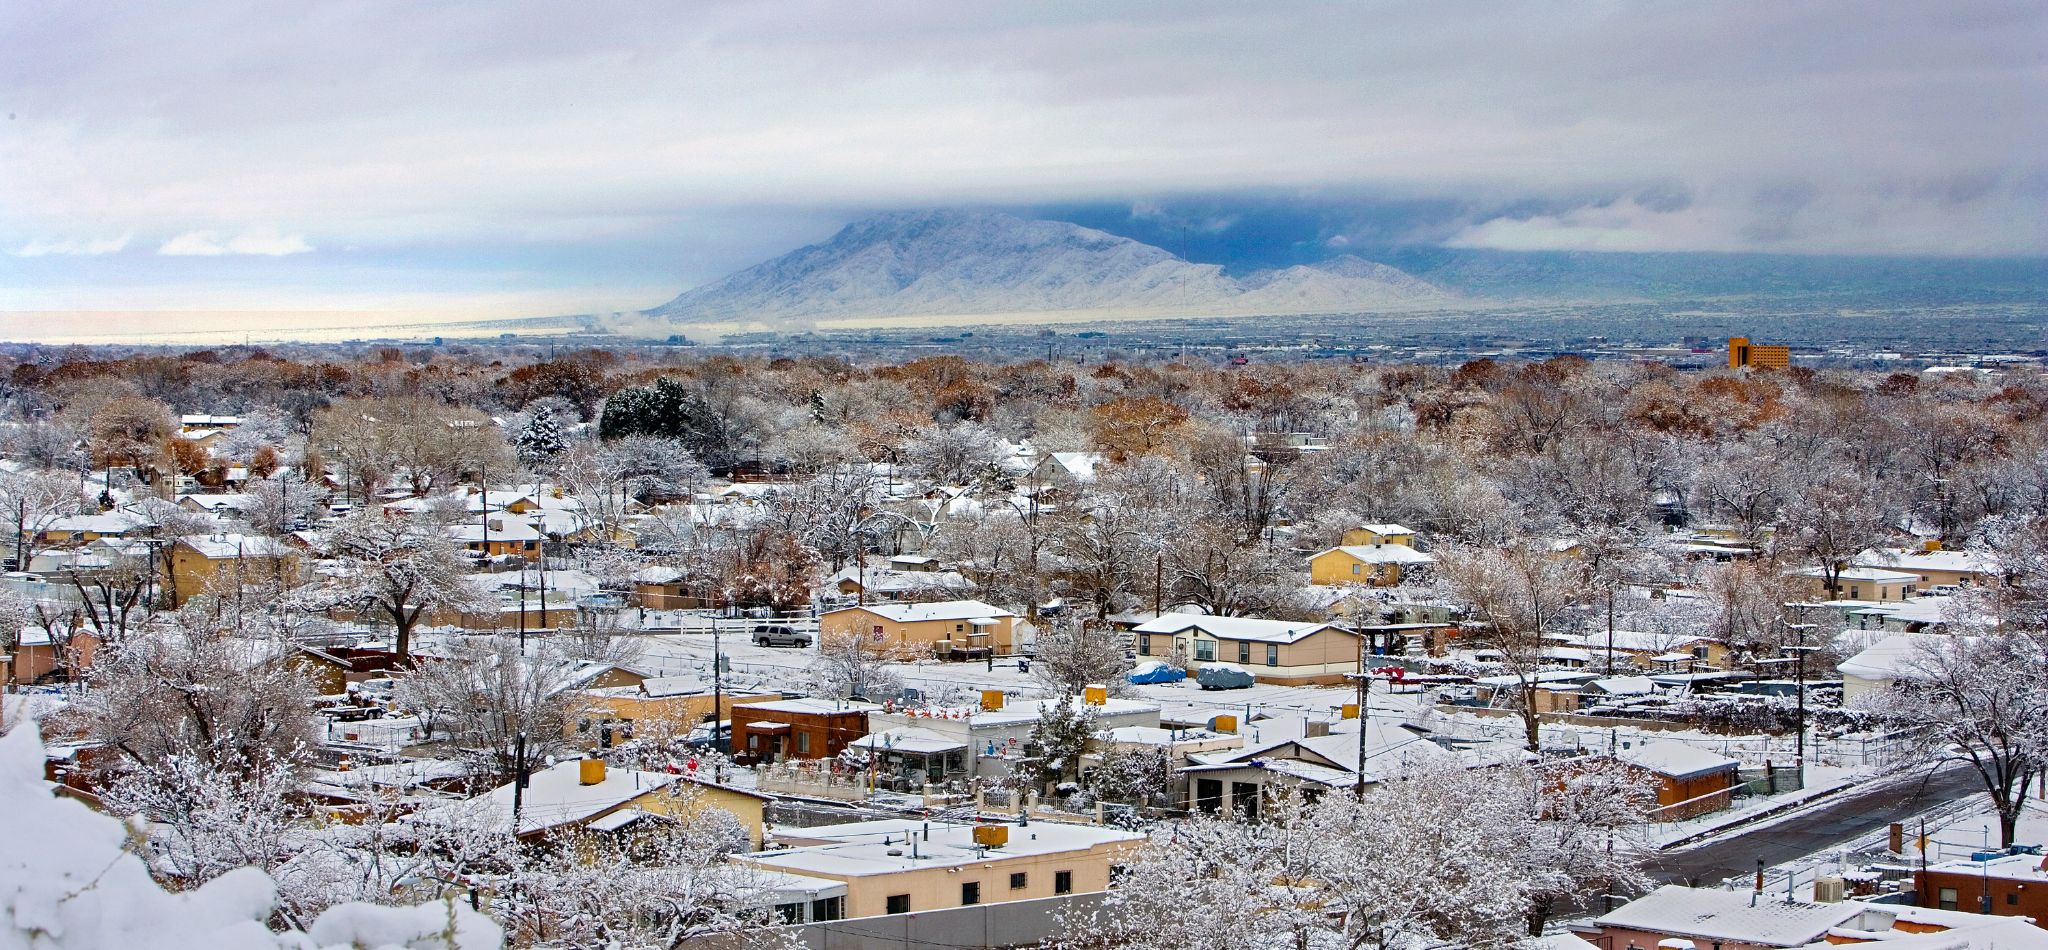 Snow covered houses and trees with the Sandia Mountains in the background.